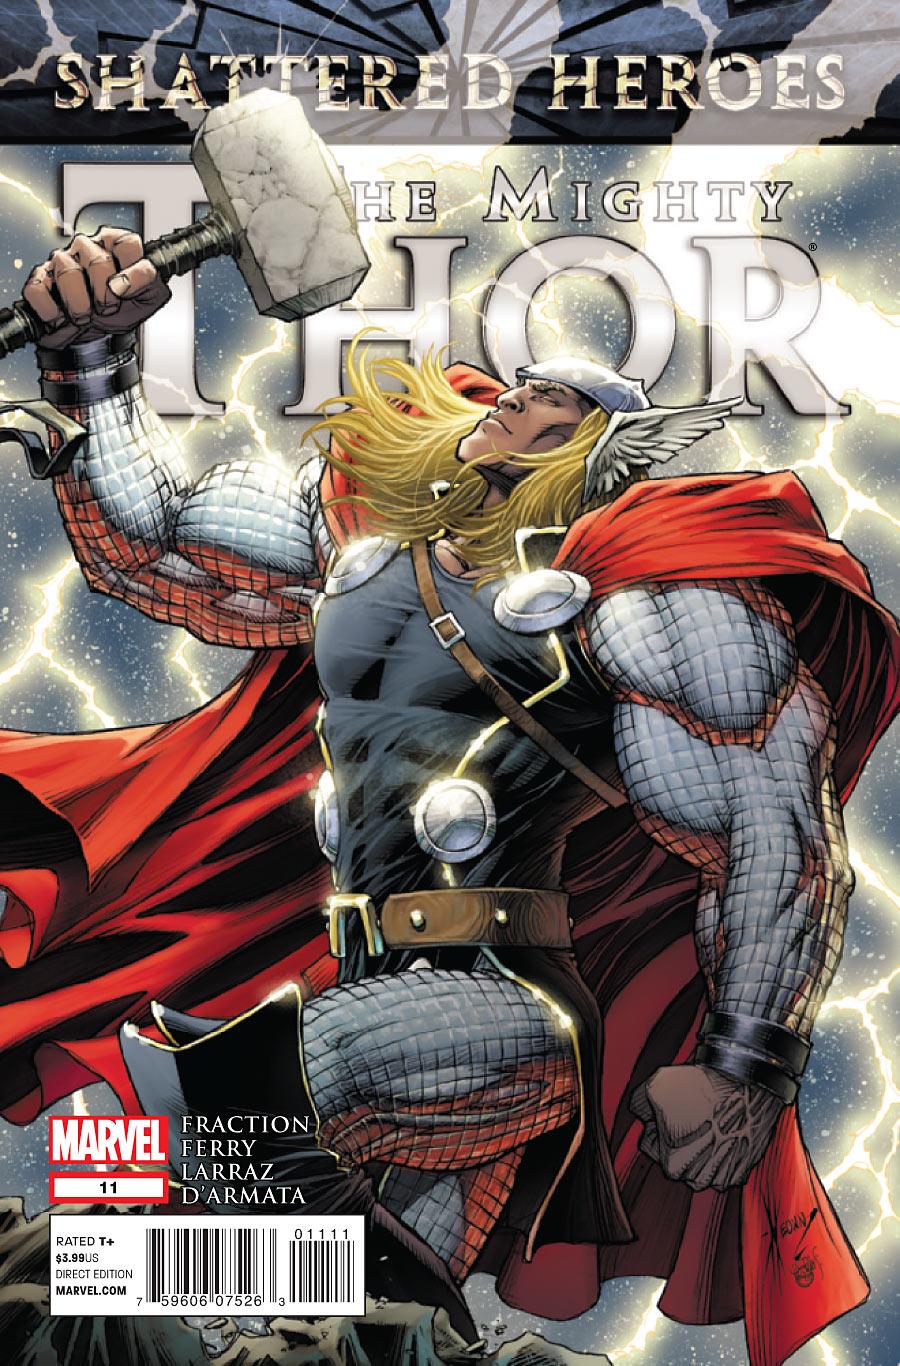 The Mighty Thor Vol. 1 #11